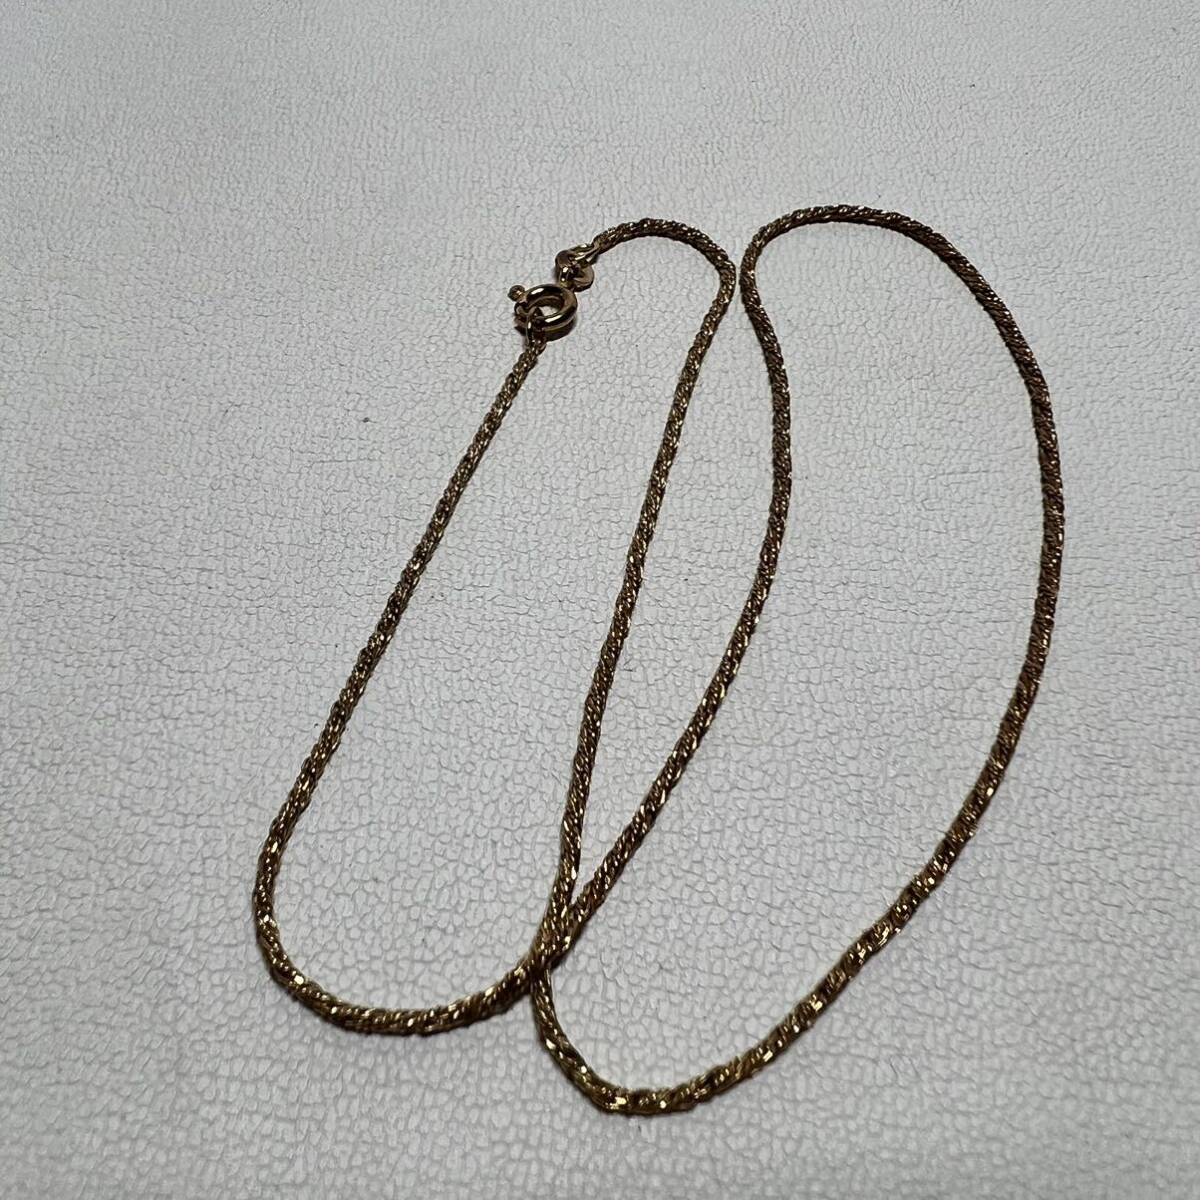 TG15 Vintage Gold necklace ITALY 18KT abroad made gross weight approximately 4.4g 40cm